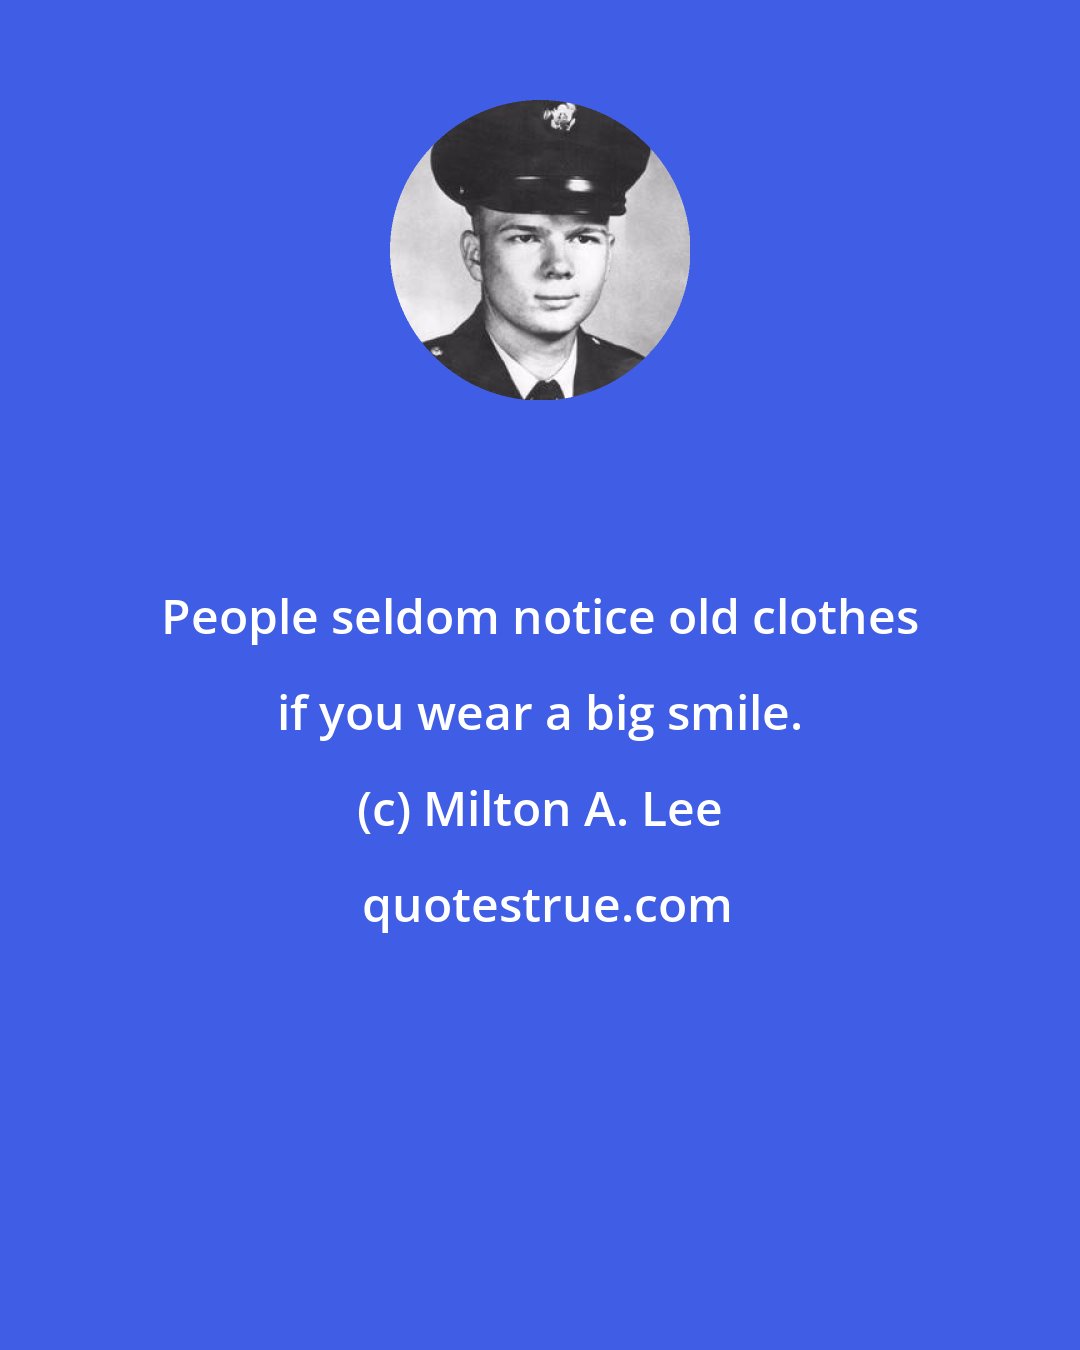 Milton A. Lee: People seldom notice old clothes if you wear a big smile.